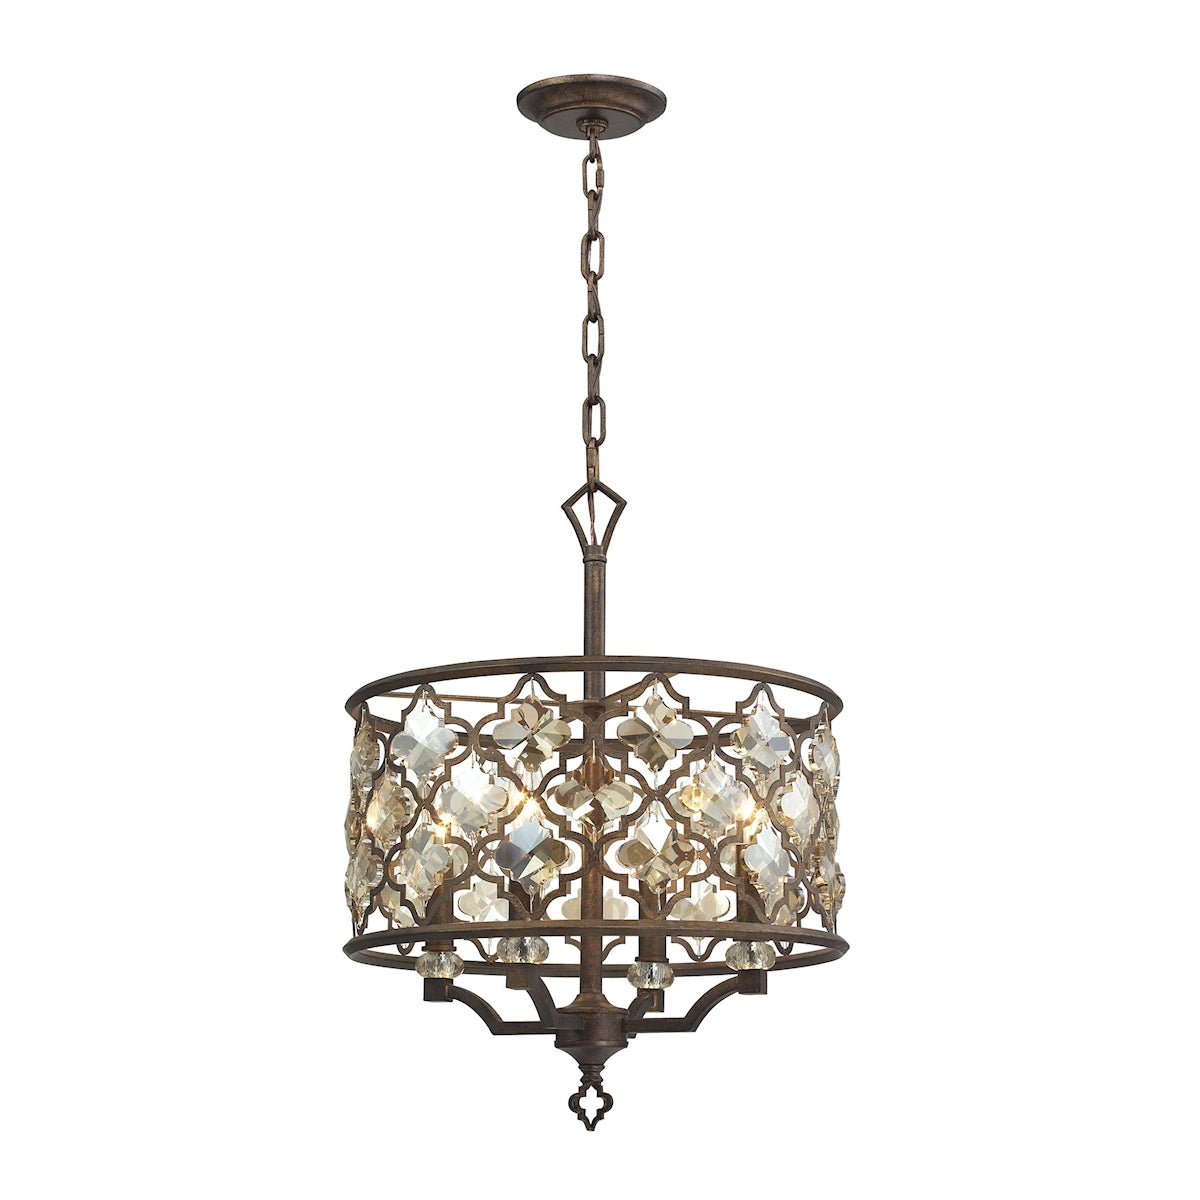 ELK Lighting 31096/4 Armand 4-Light Chandelier in Weathered Bronze with Amber Teak Crystals and Metal Shade